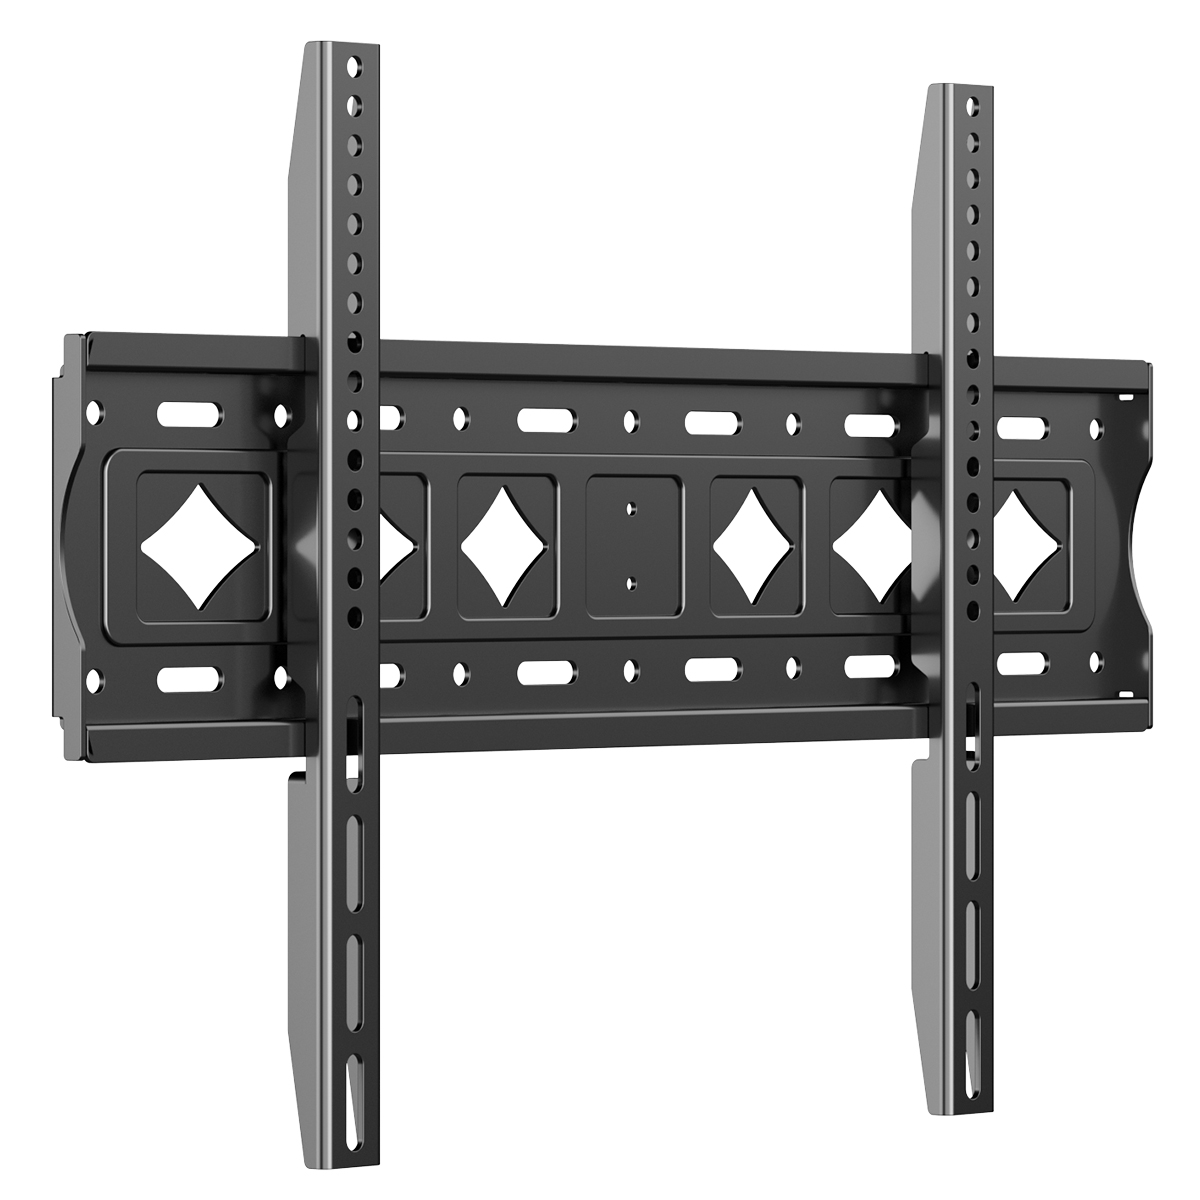 Large Size TV Rack For Wall Flush Wall Mount